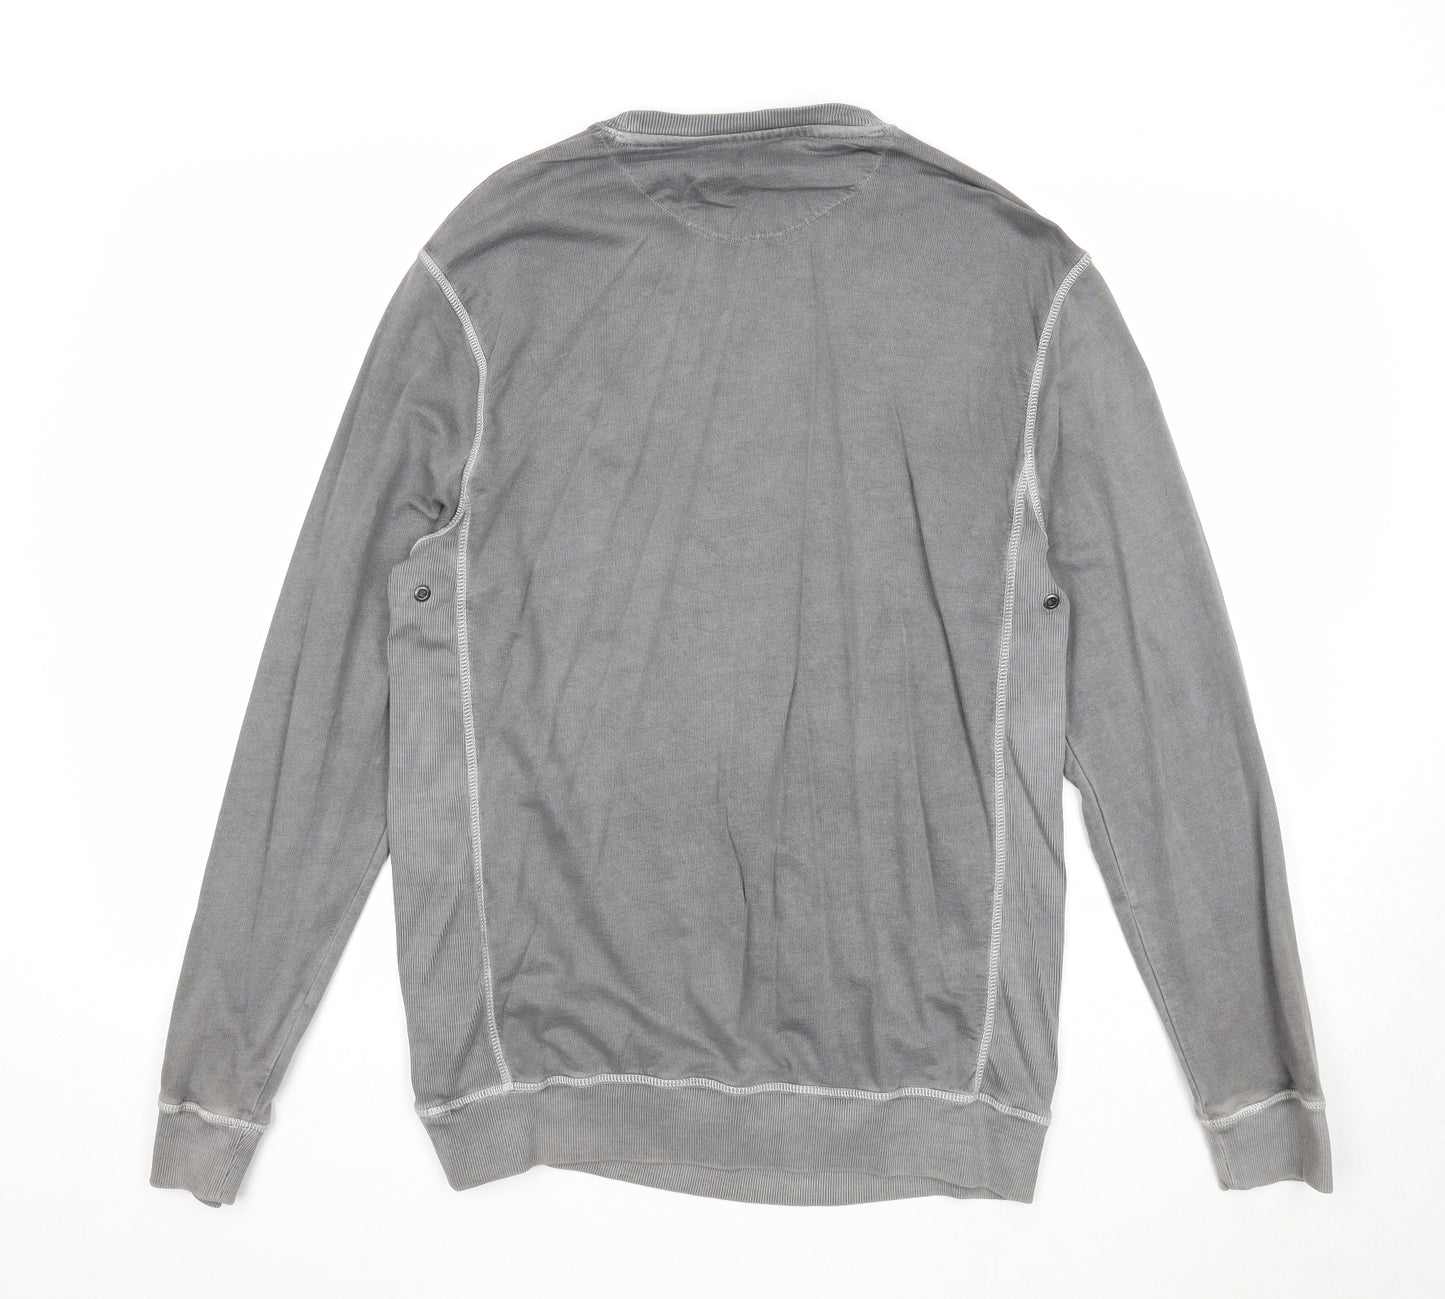 ONLY & SONS Mens Grey Cotton Pullover Sweatshirt Size S